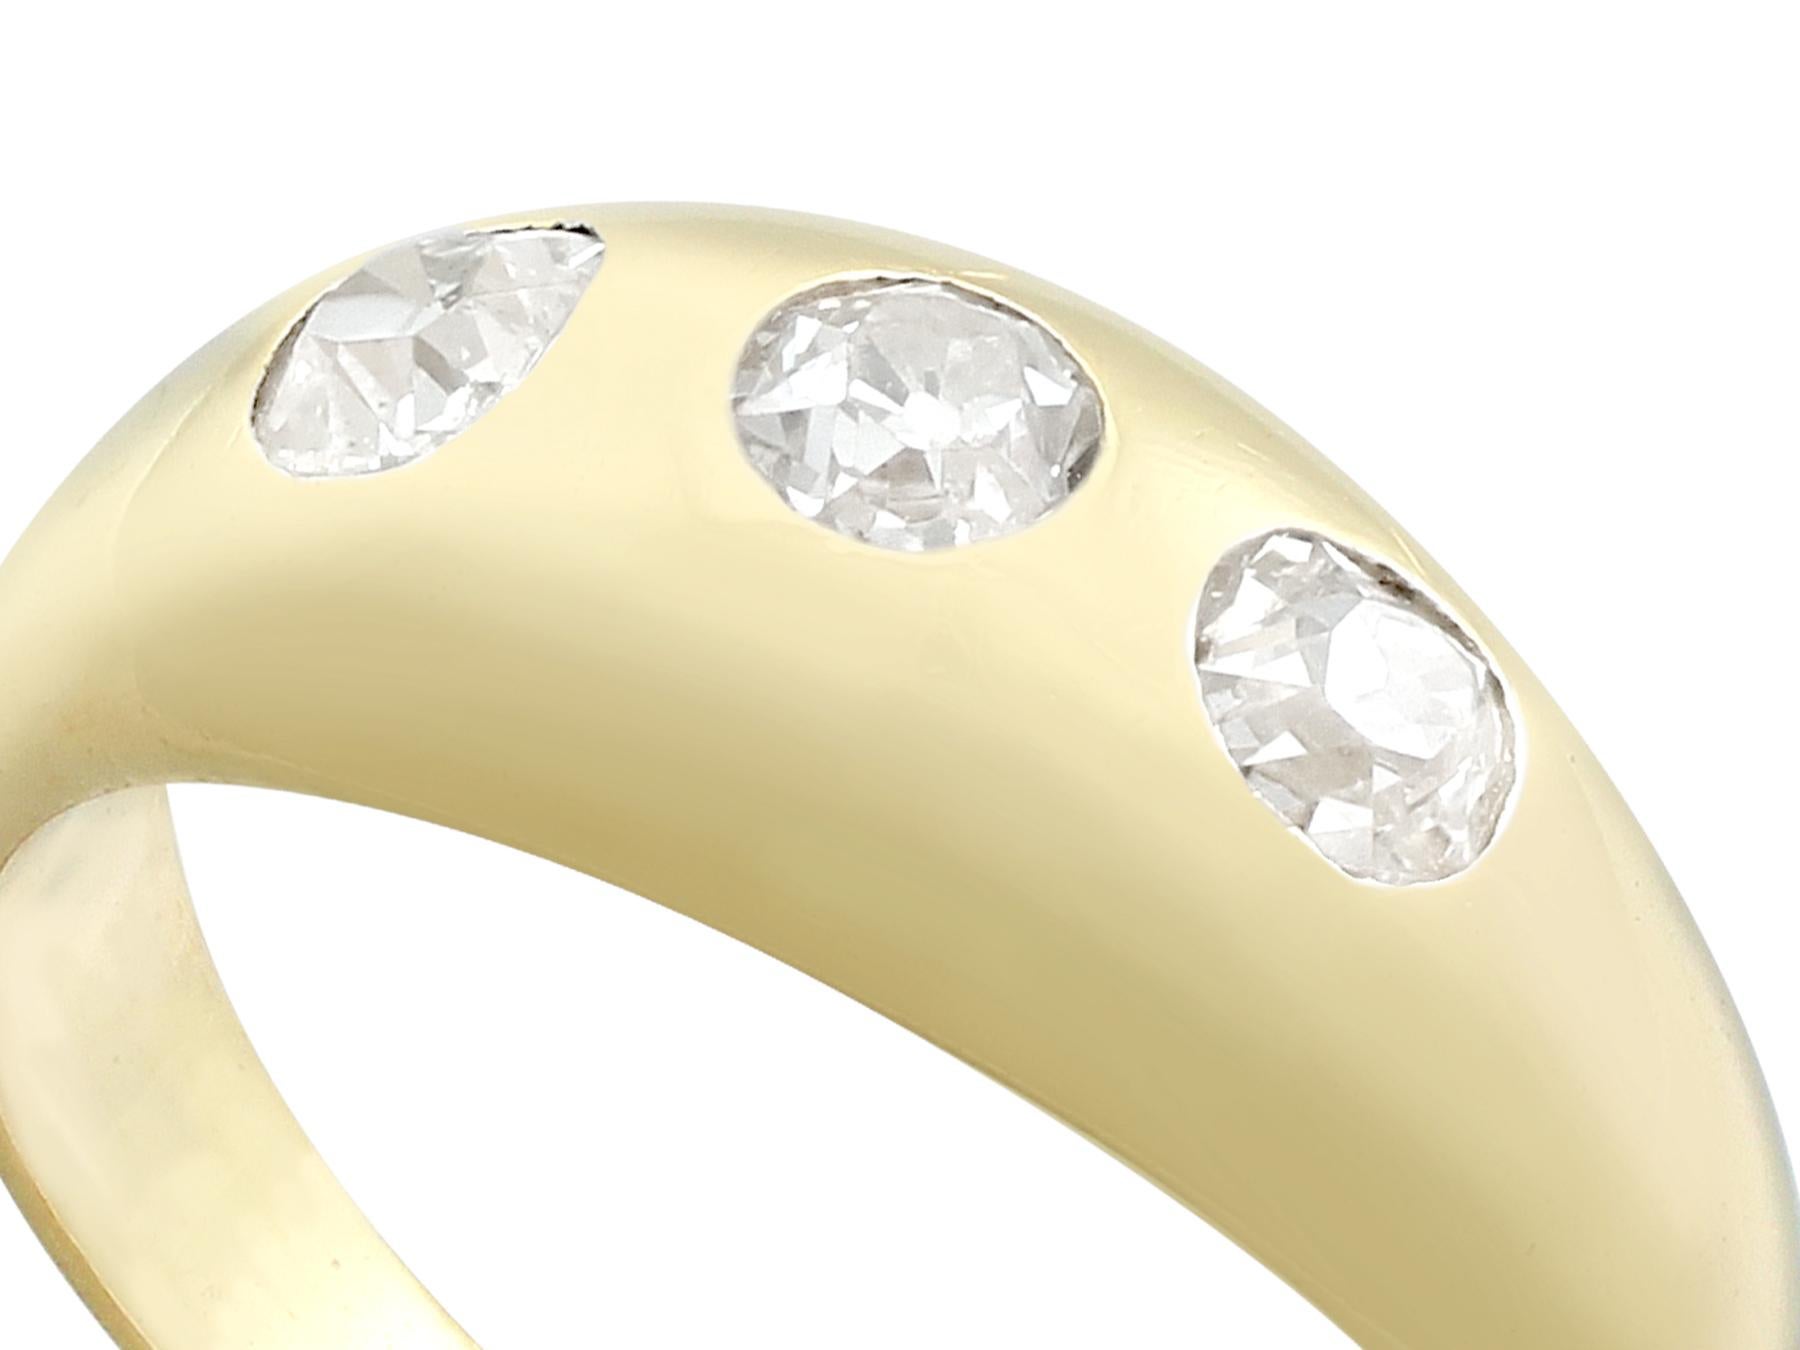 An impressive antique gent's 0.61 carat diamond and 14 karat yellow gold trilogy style dress ring; part of our diverse antique jewelry and estate jewelry collections.

This fine and impressive men's diamond ring has been crafted in 14k yellow